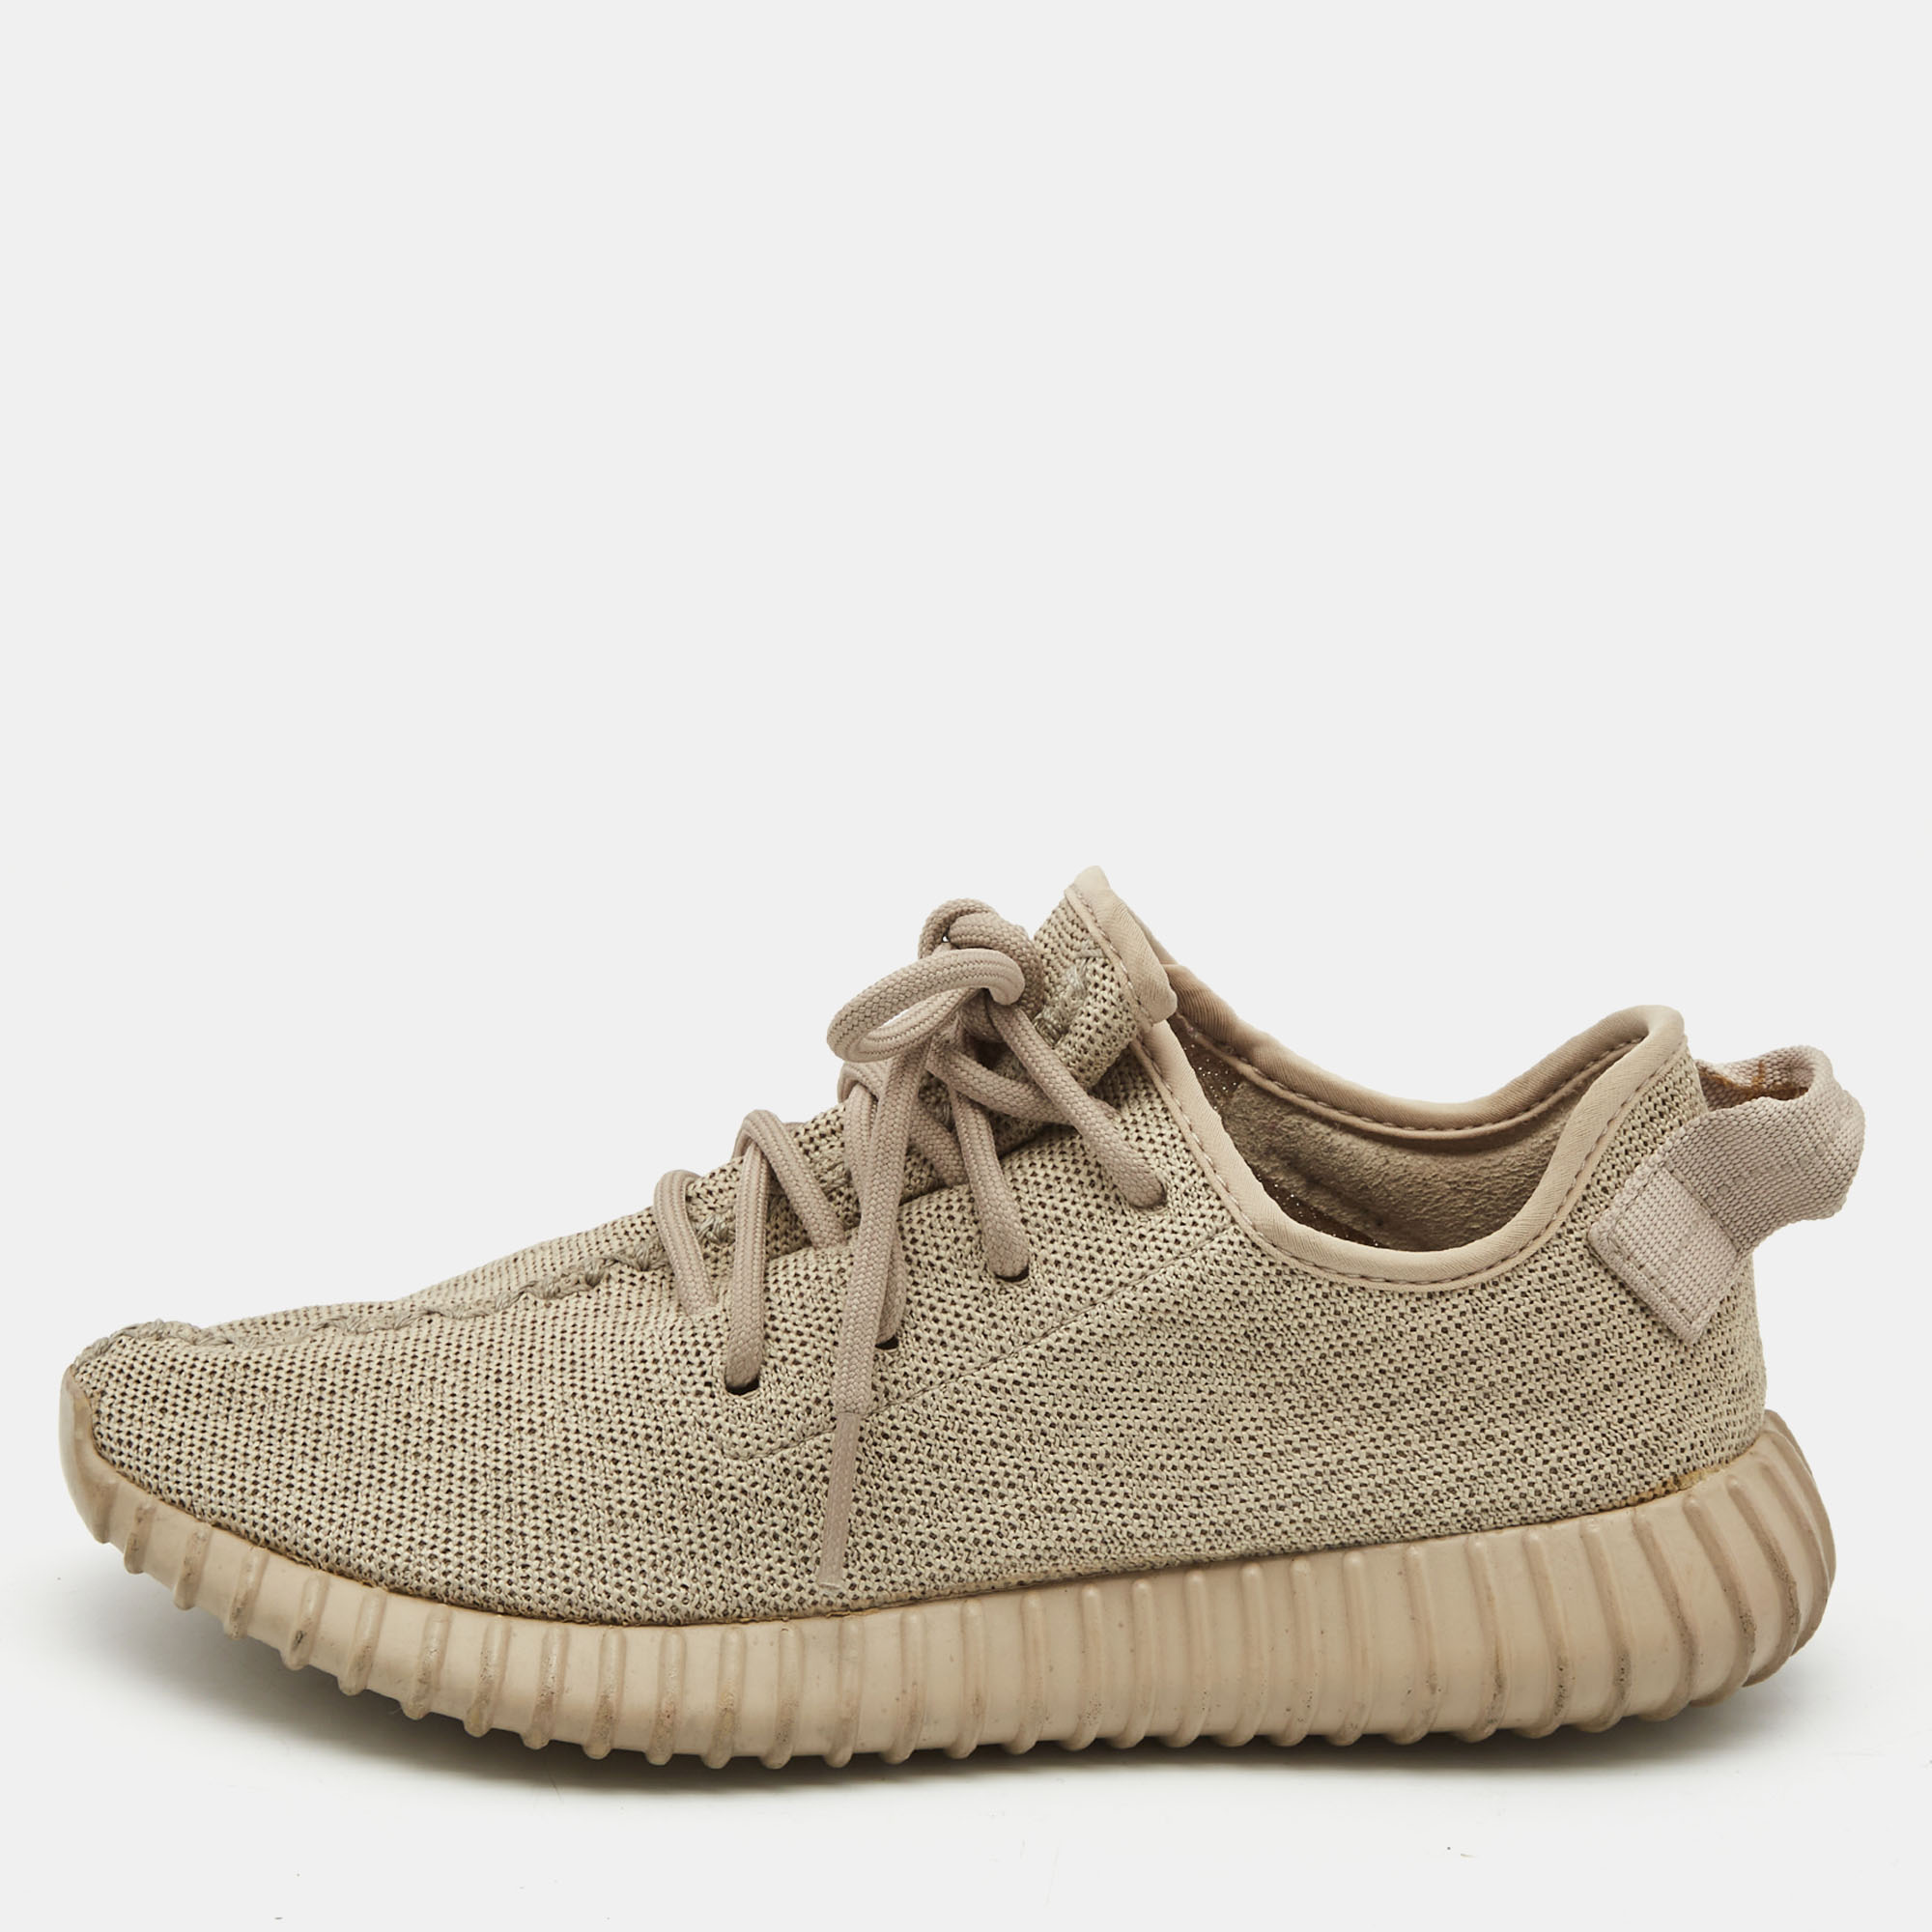 

Yeezy x Adidas Beige Knit Fabric Boost 350 V2 Oxford Tan Sneakers Size  1/3